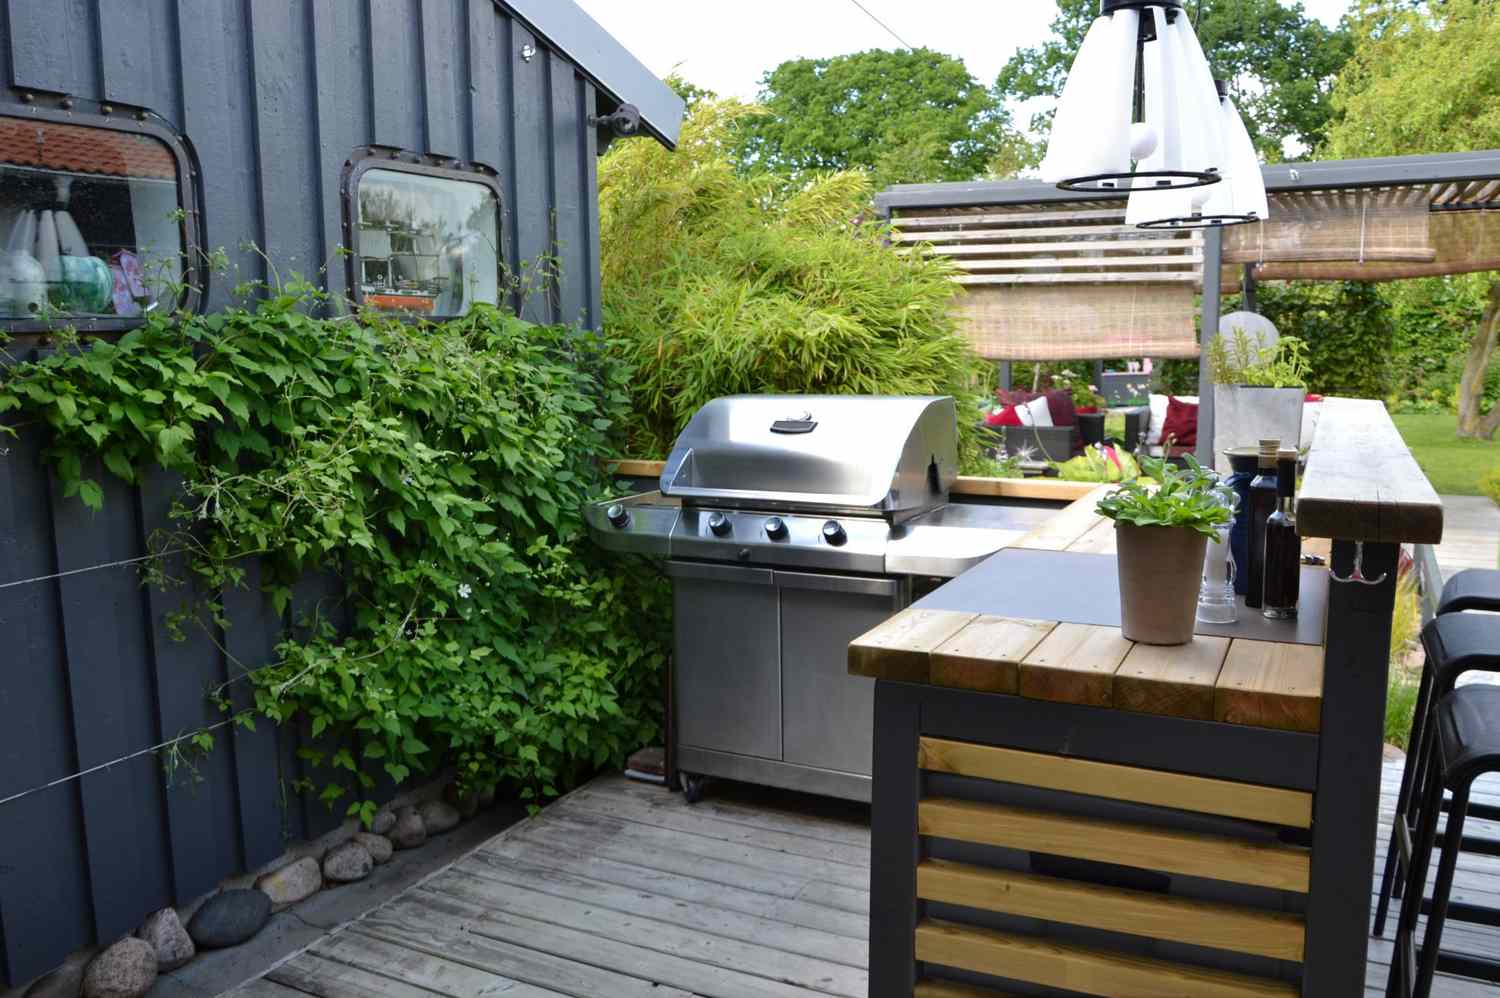 3 Use a pergola to house your grill station